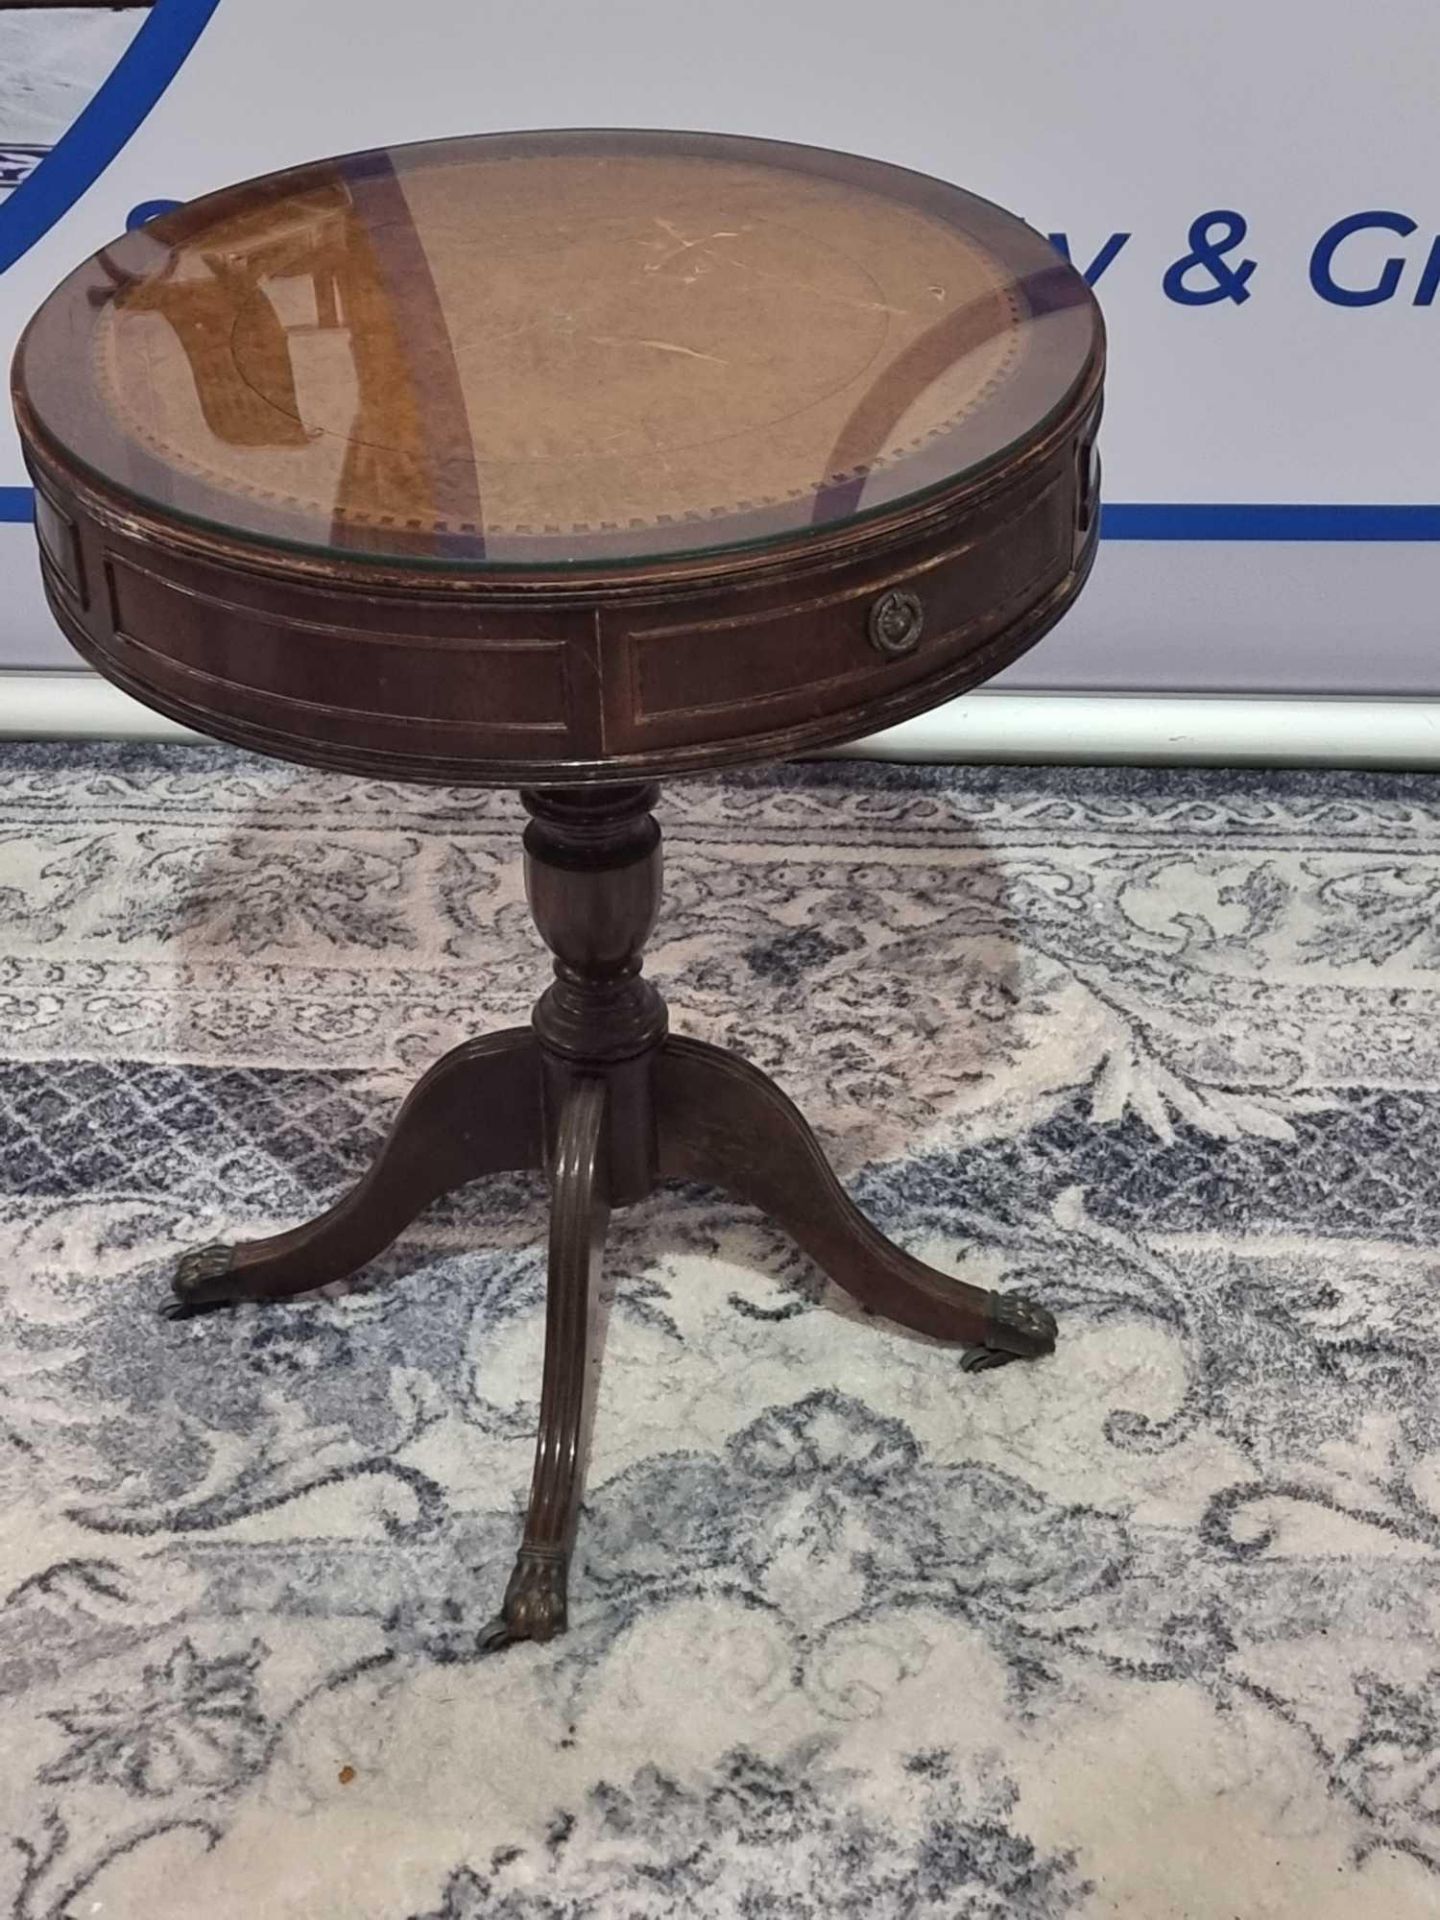 A Regency Style Mahogany Drum Table With Leather Inlay Top And Glass Protector Over The Apron - Image 5 of 5